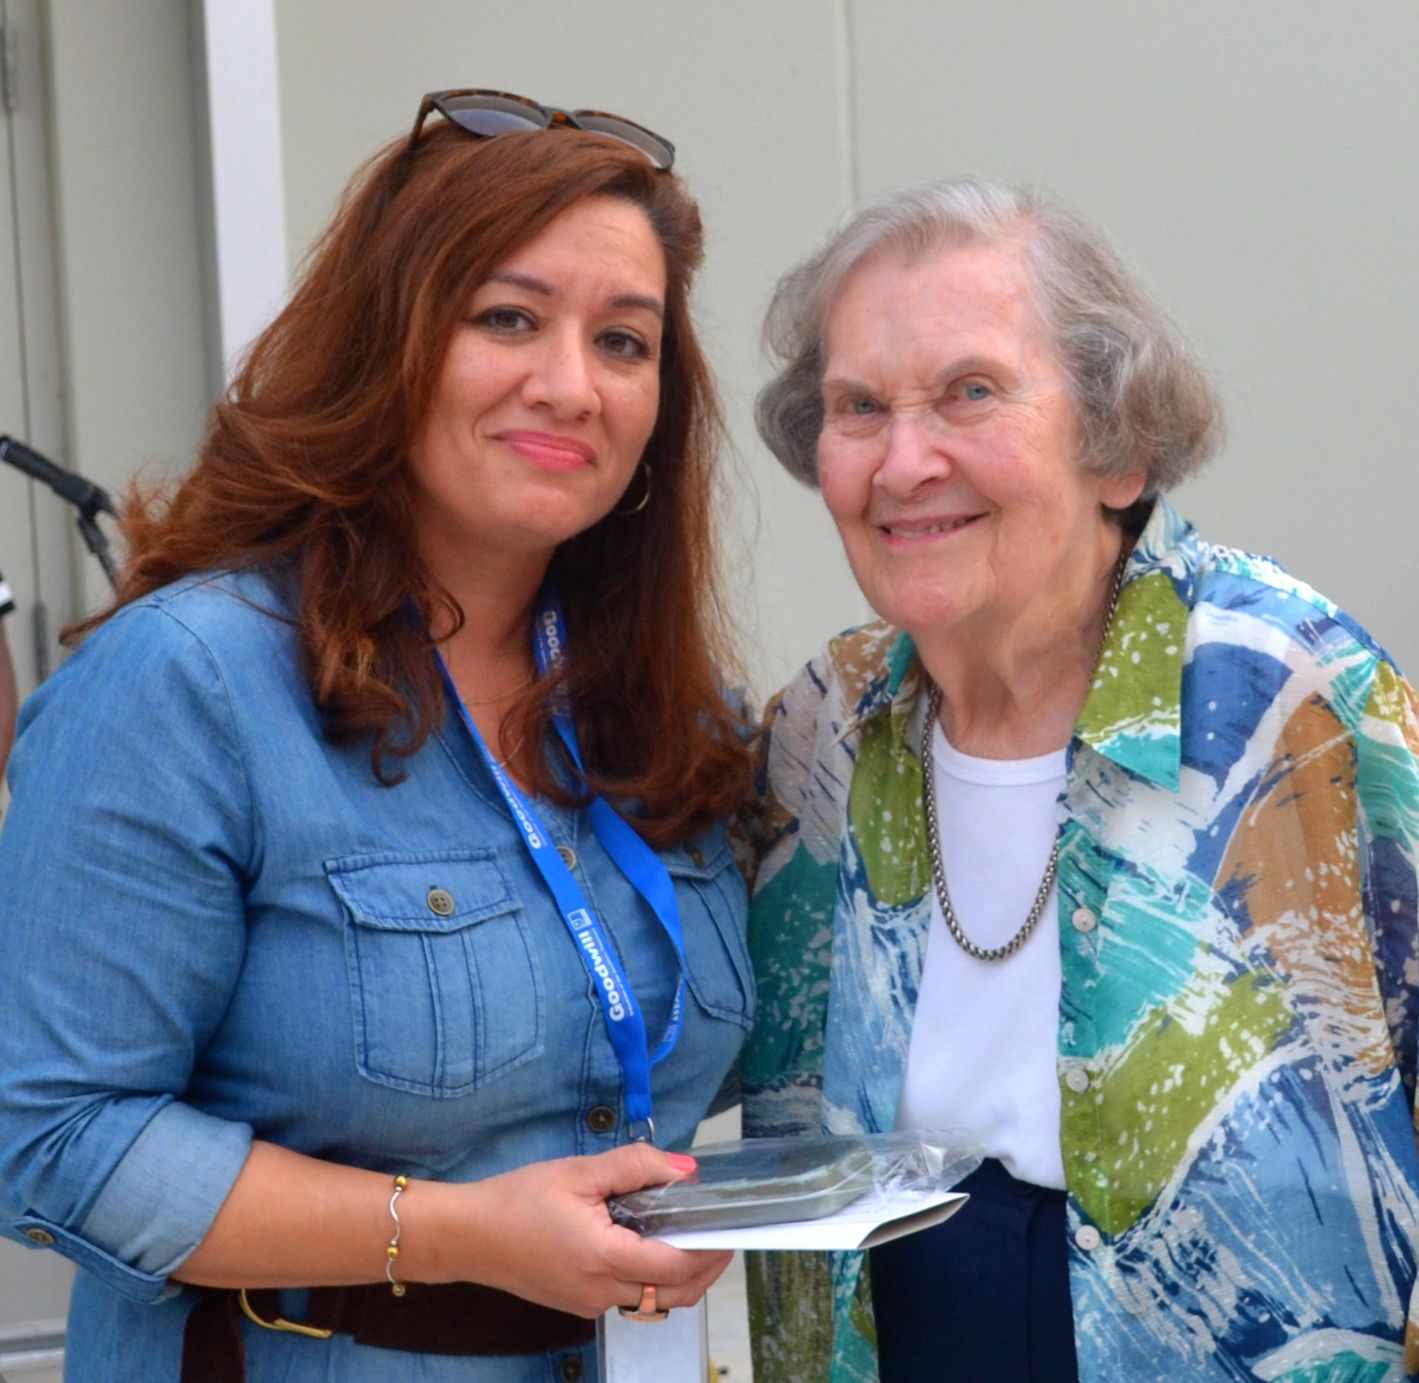 Betty Ritchie poses with Delilah Montalvo as she receives her volunteer of the year award at CCT's 2017 Spring Fling